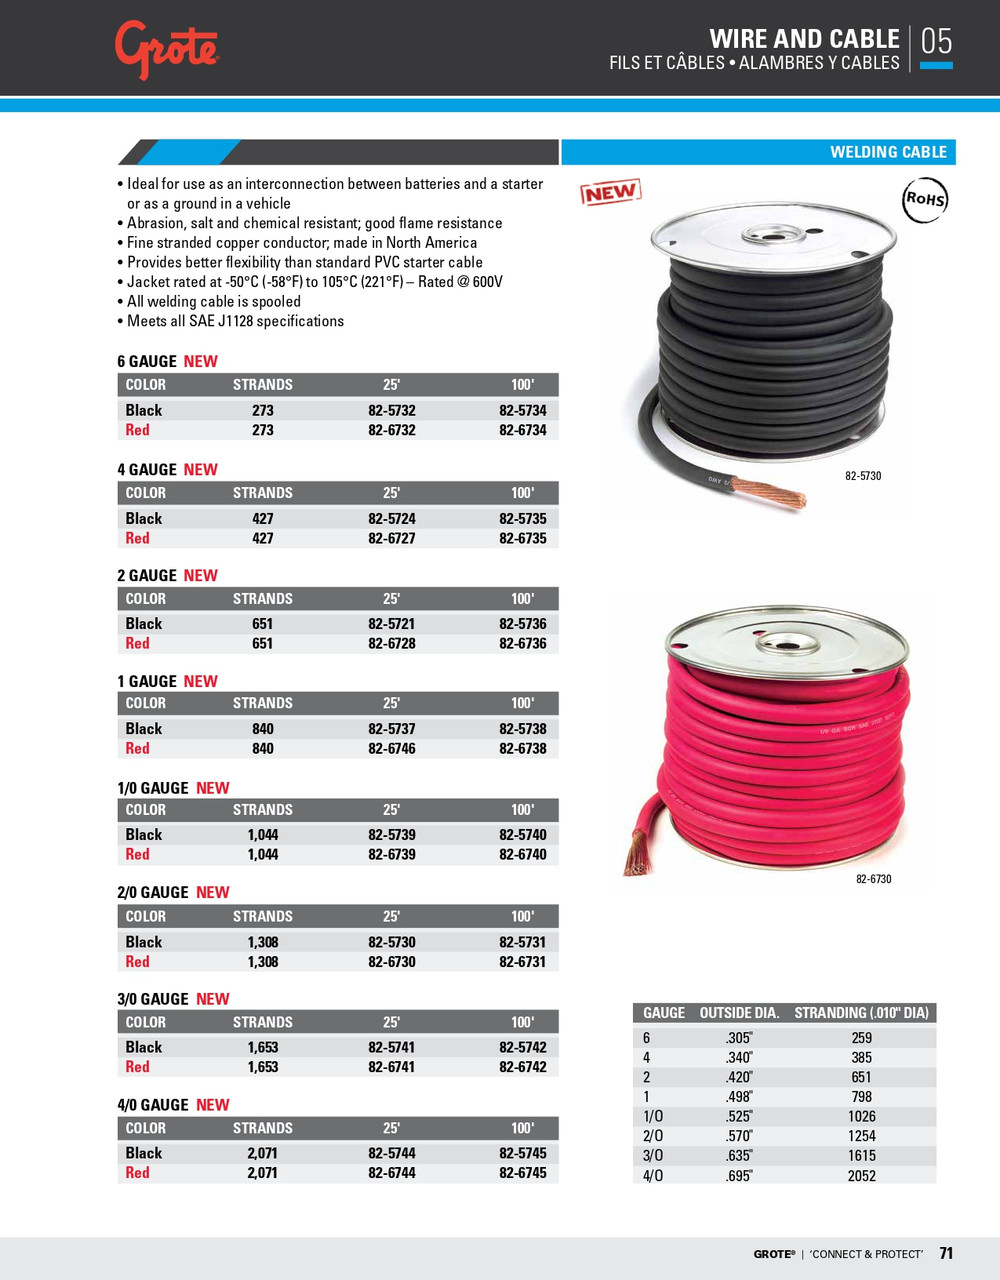 1 AWG Welding Cable @ 100' - Black  82-5738